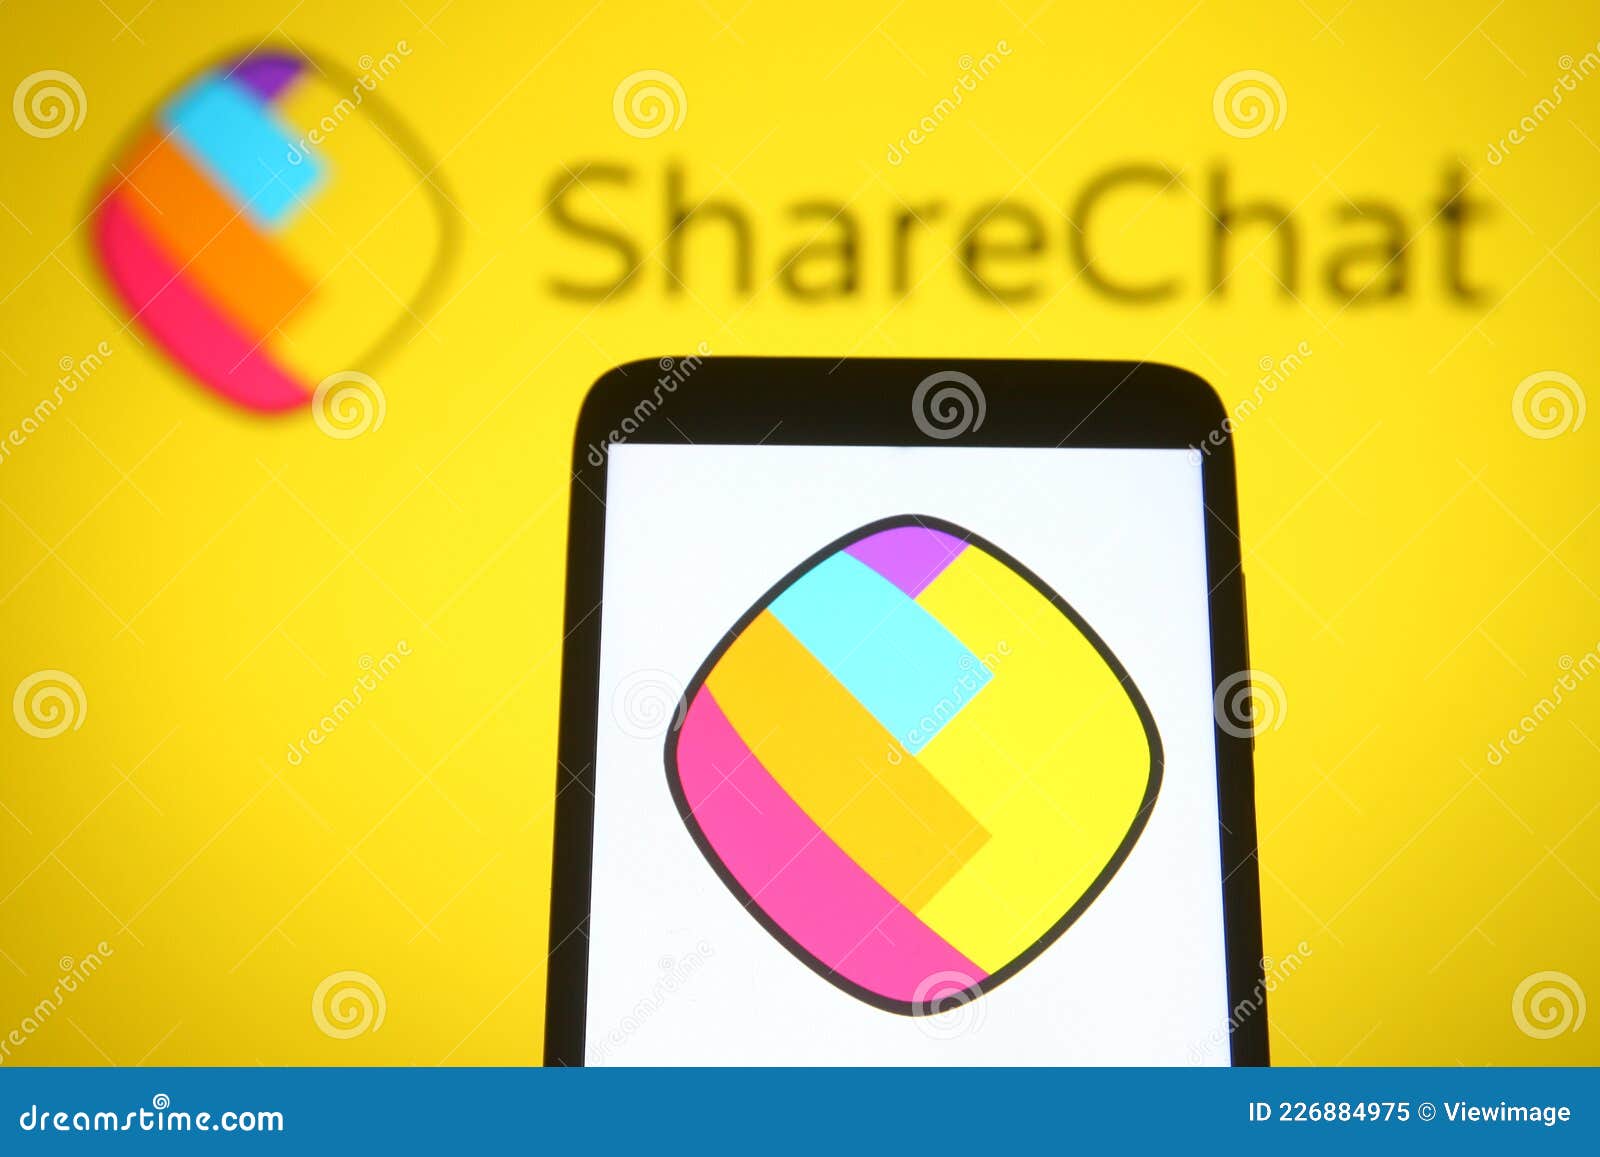 Assam, India - March 10, 2021 : ShareChat Logo on Phone Screen Stock Image.  Editorial Photo - Image of android, illustrative: 213219376